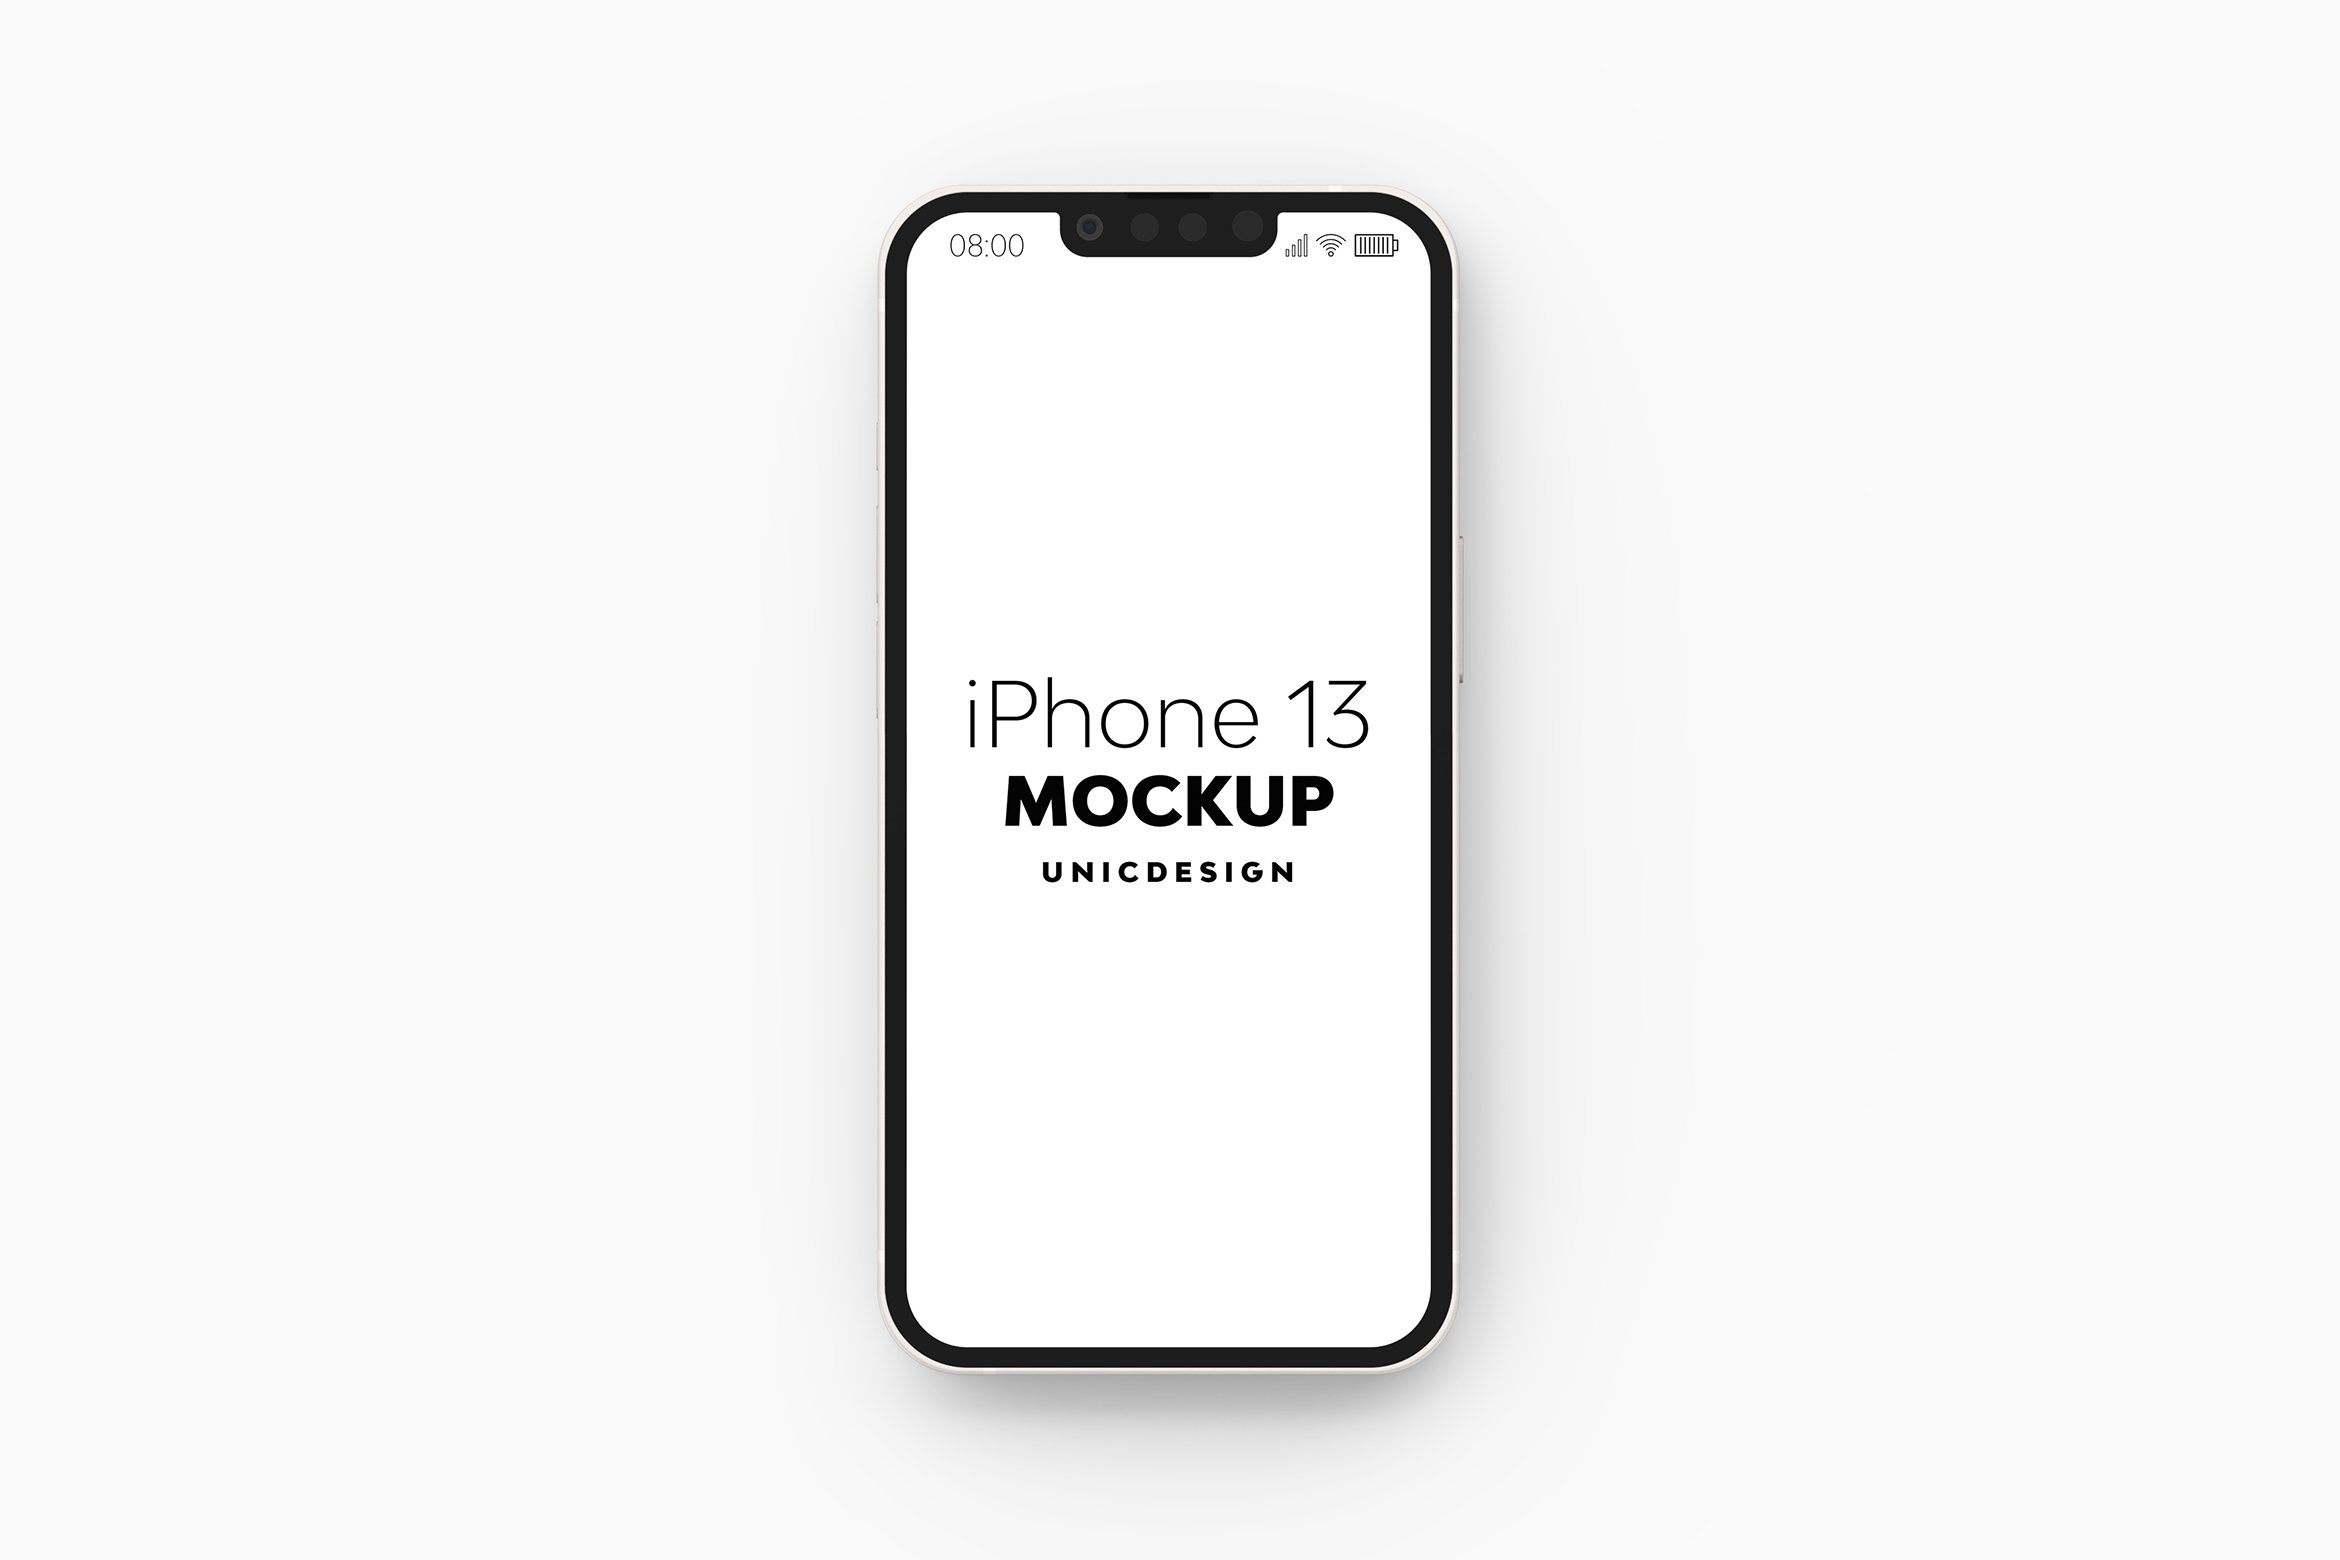 iPhone 13 Mockup cover image.